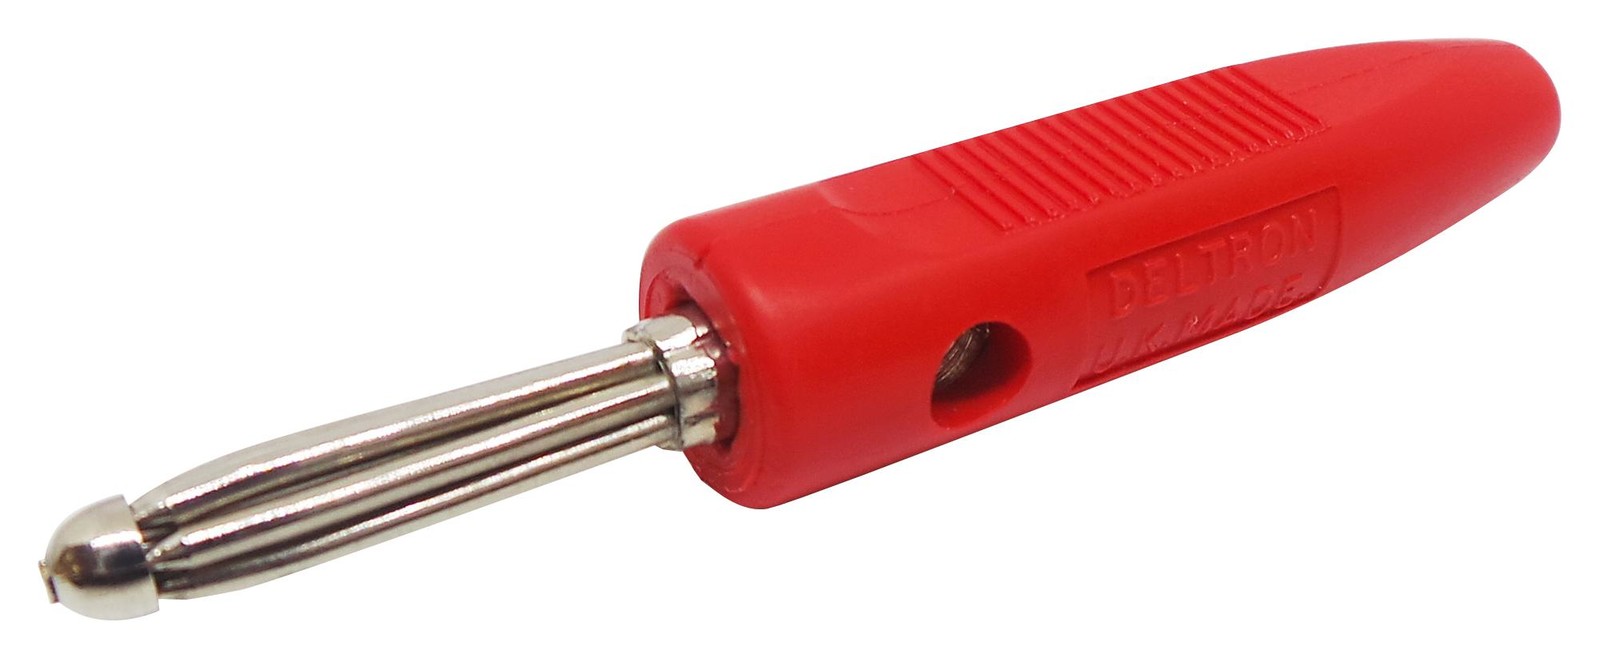 Deltron Components 555-0500-01 Plug, 4Mm, Bunch Pin, Red